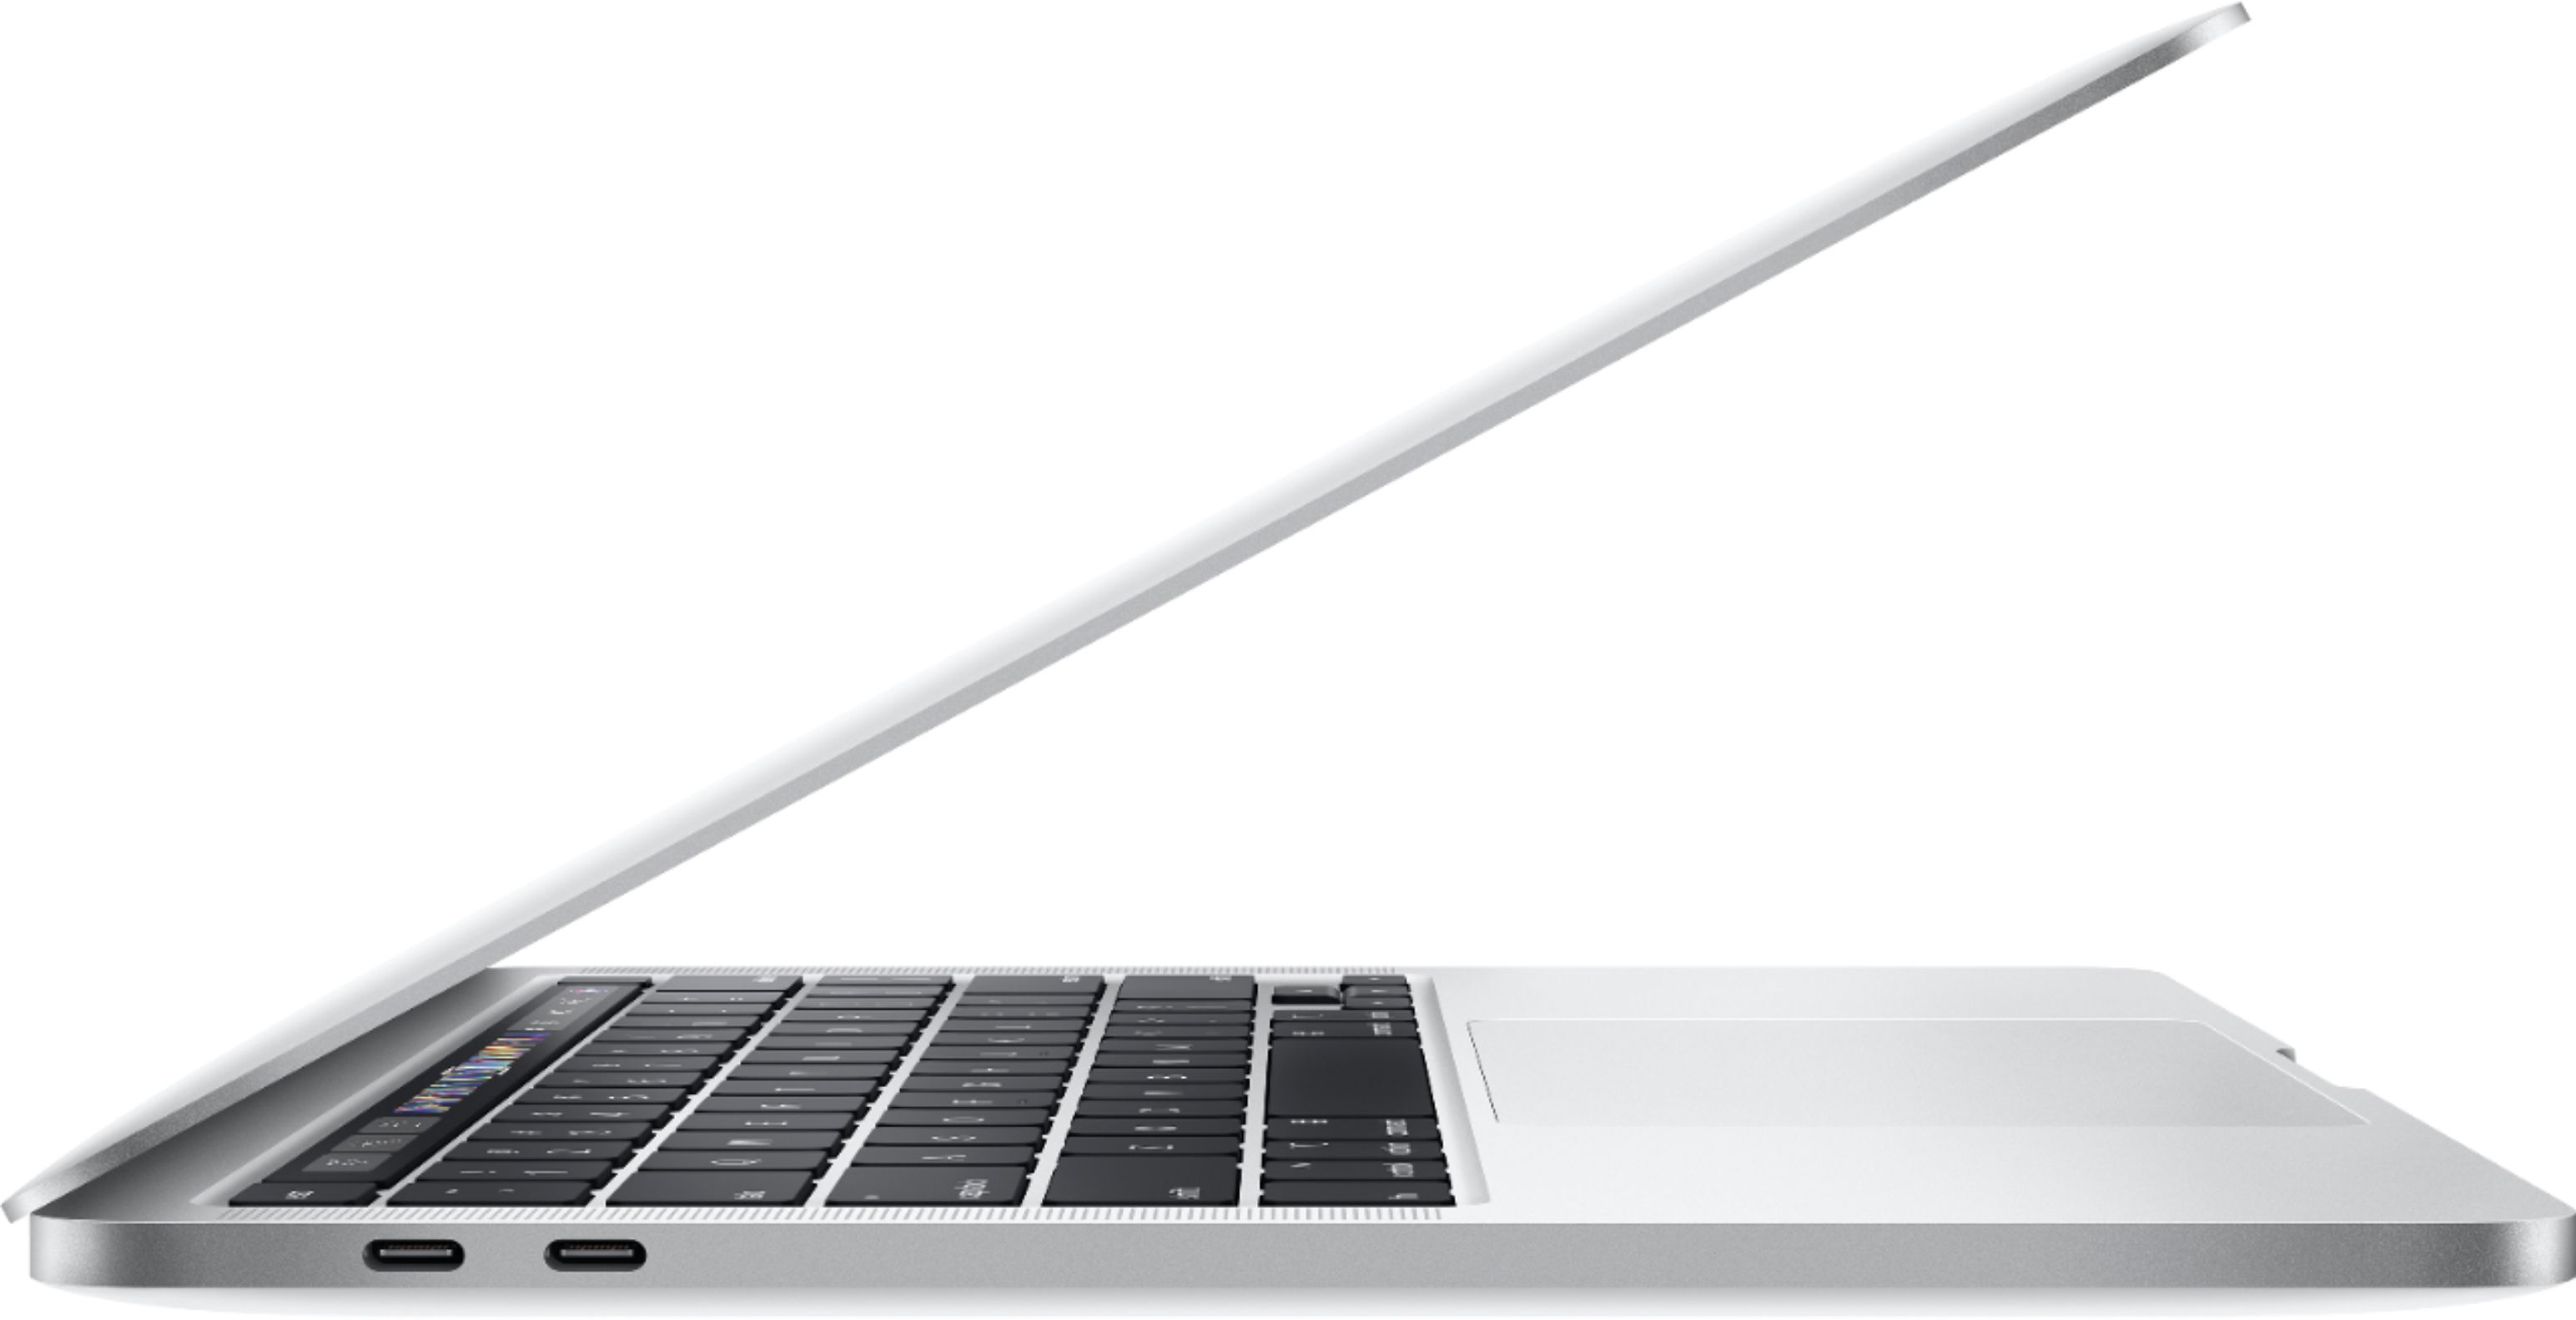 Apple Geek Squad Certified Refurbished MacBook Pro 13 Display with Touch  Bar Intel Core i5 8GB Memory 256GB SSD Silver GSRF MXK62LL/A - Best Buy